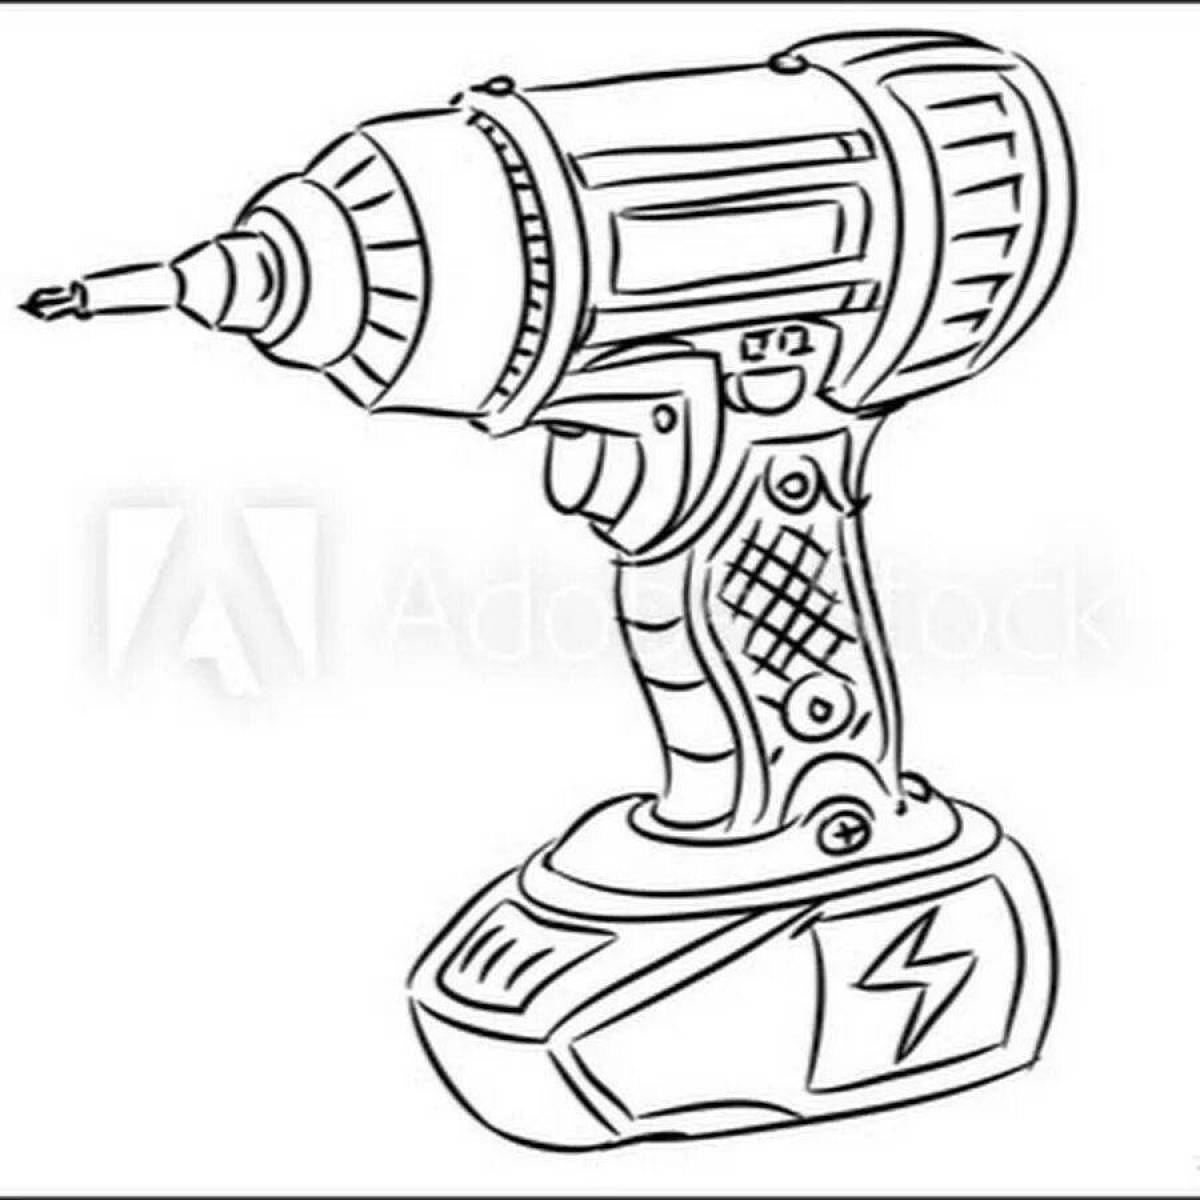 Colorful screwdriver coloring page